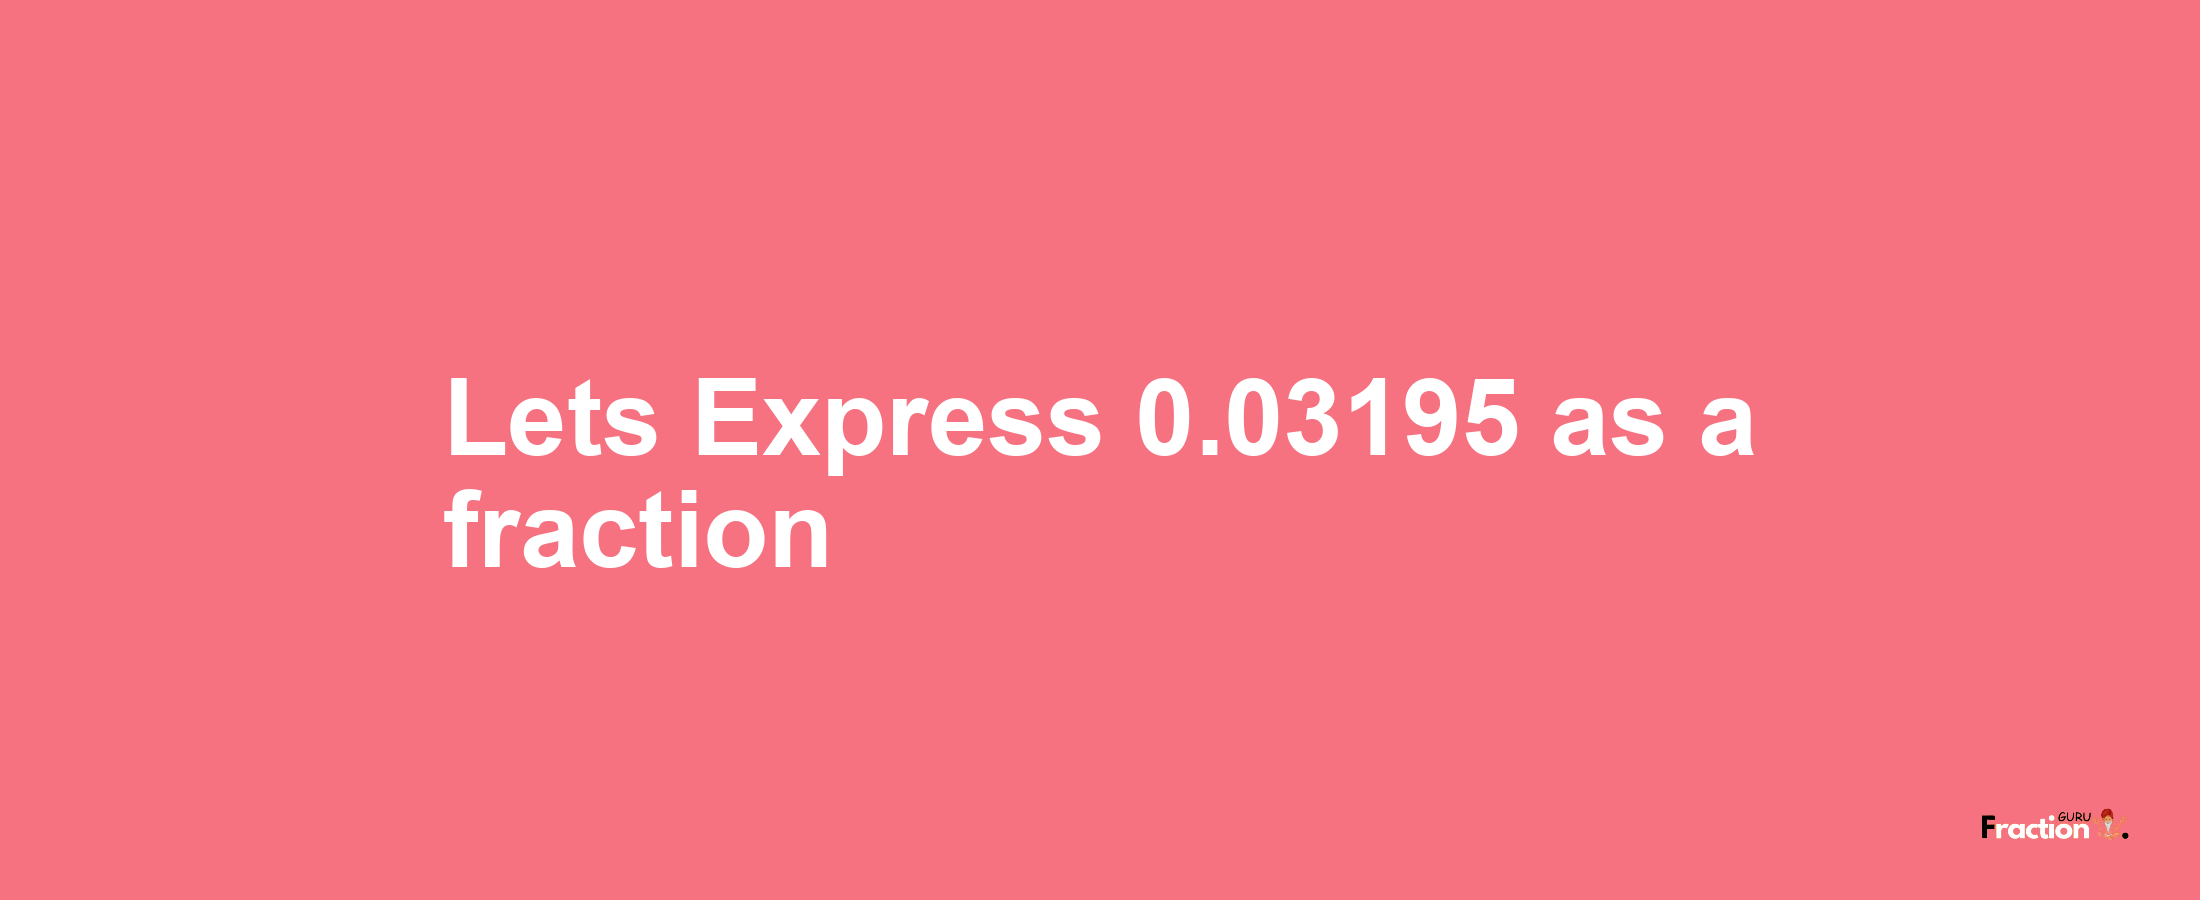 Lets Express 0.03195 as afraction